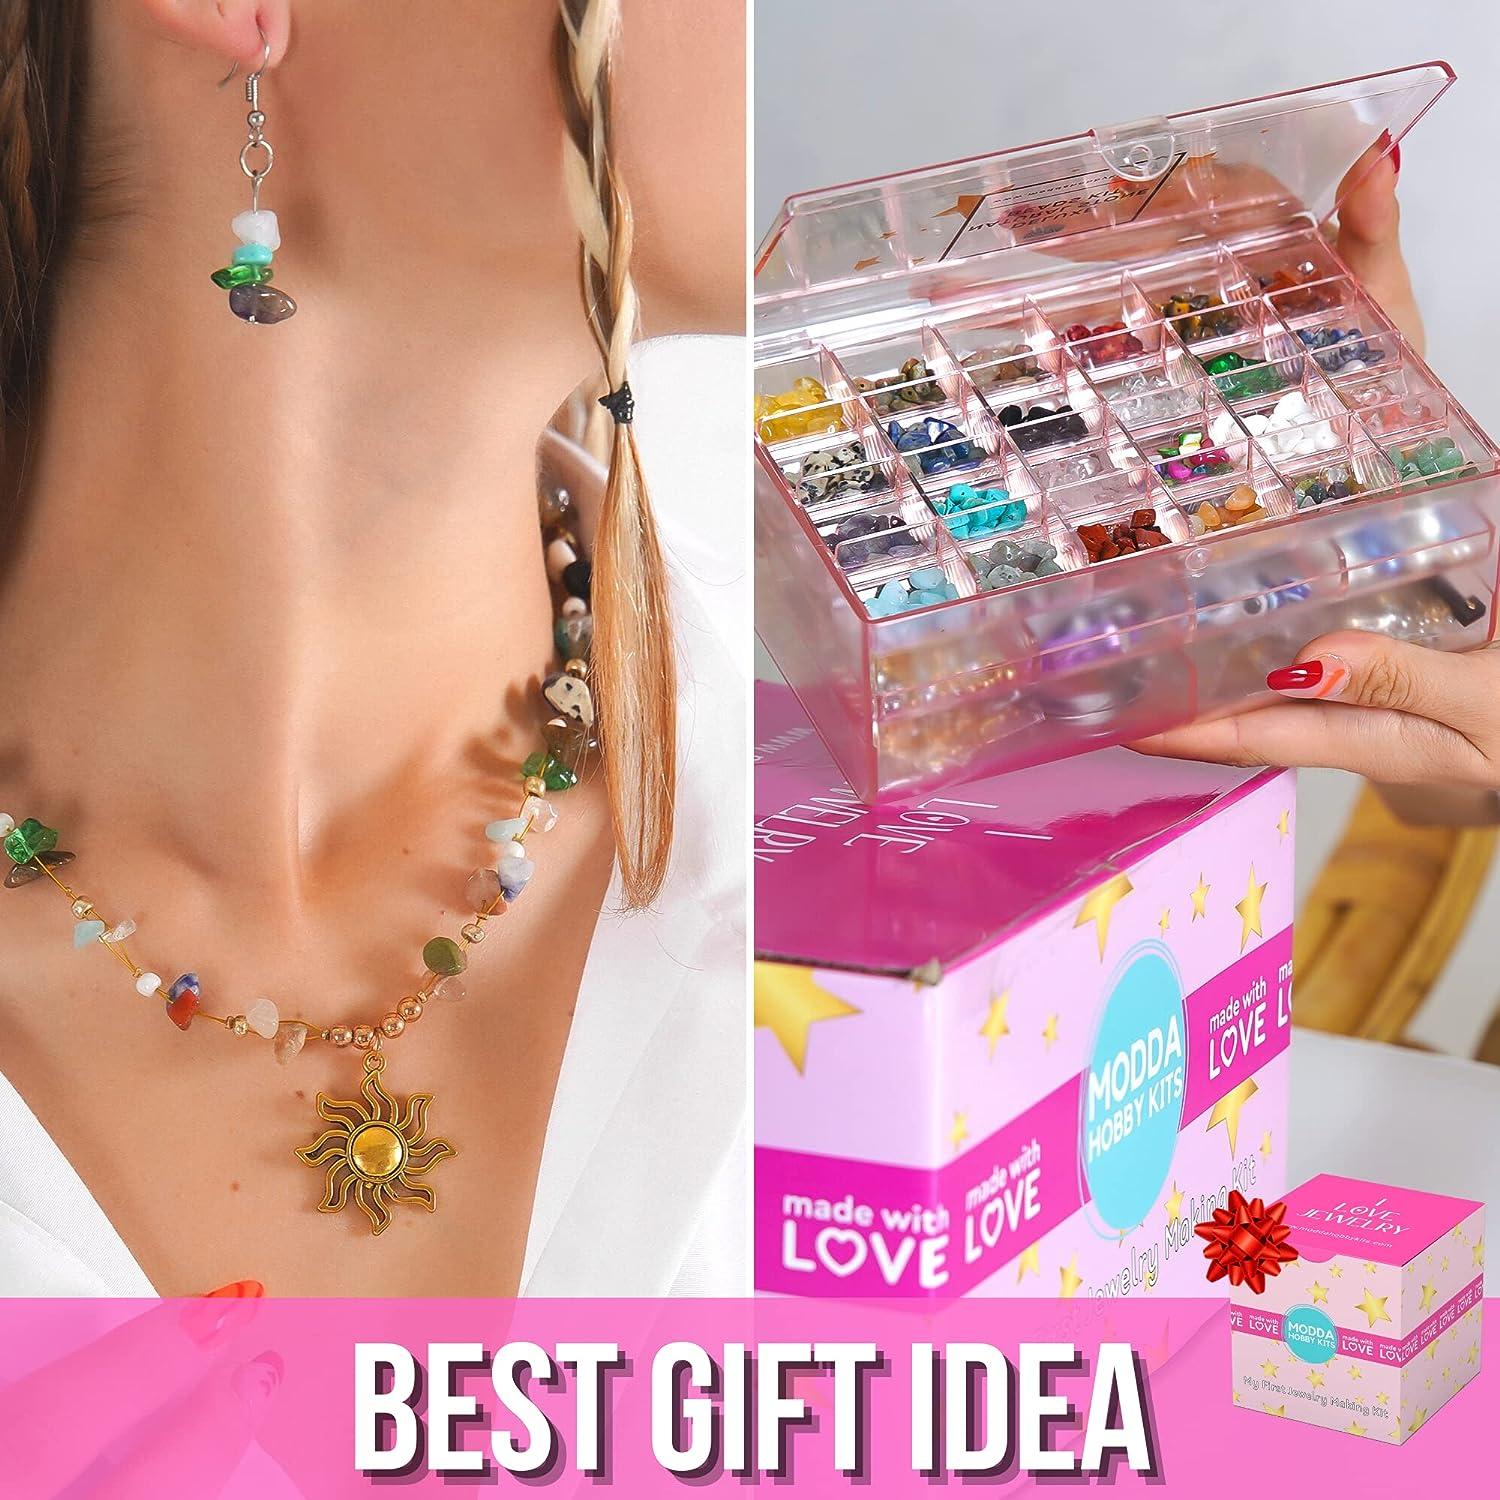 MODDA Natural Stone Jewelry Making Kit with Video Course Includes